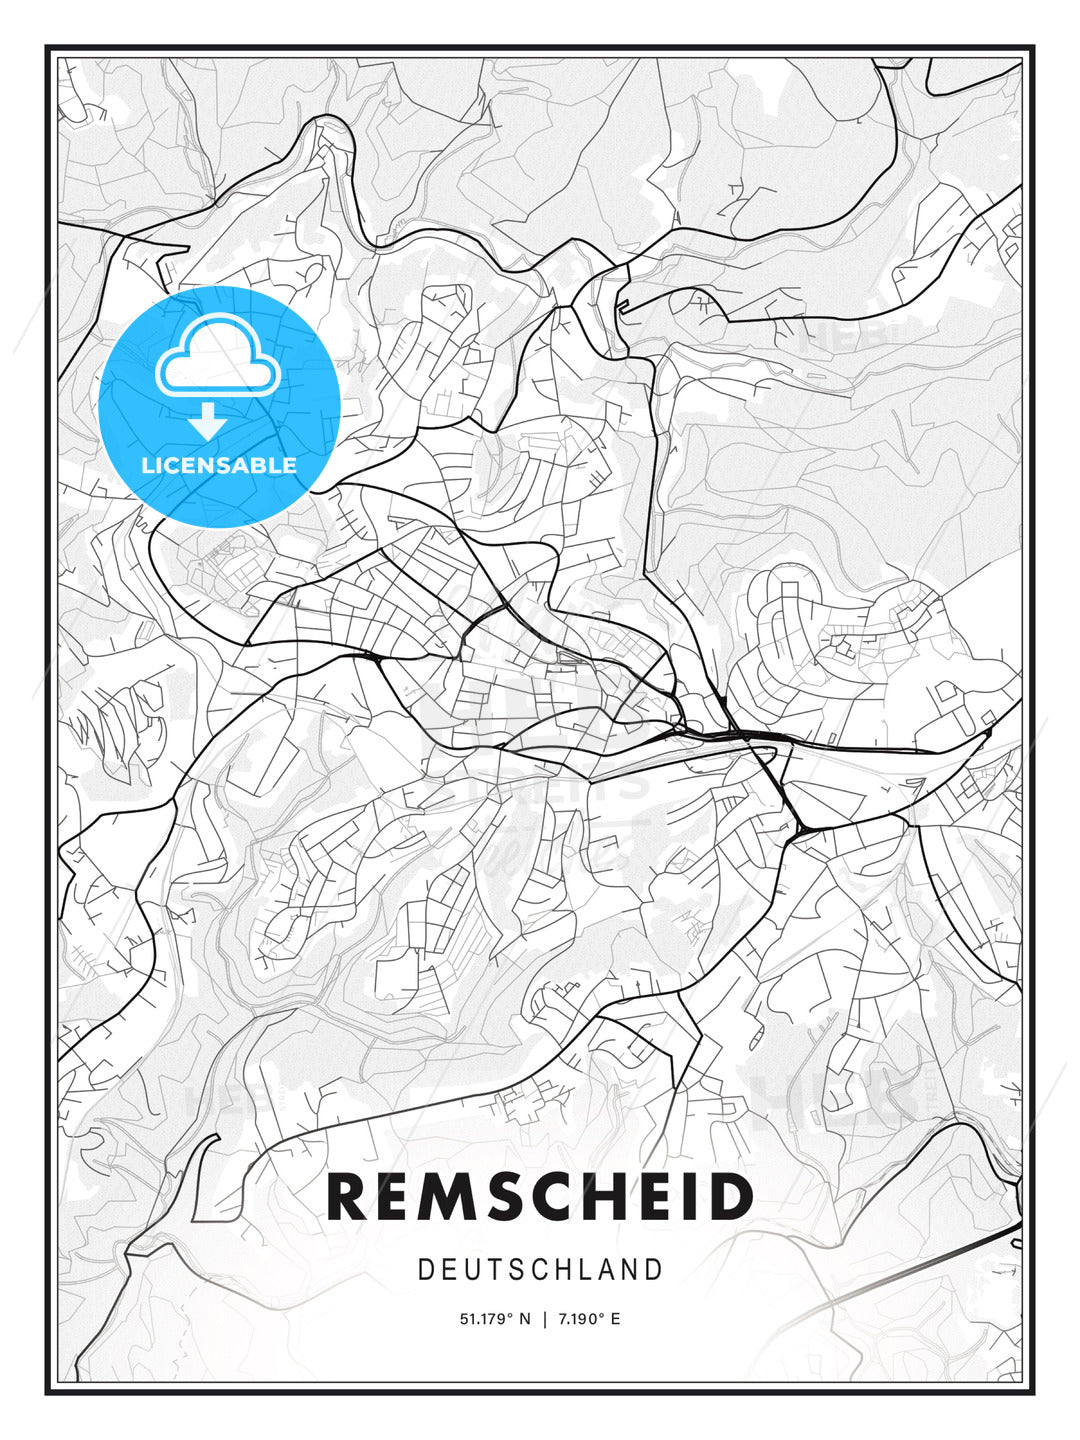 Remscheid, Germany, Modern Print Template in Various Formats - HEBSTREITS Sketches